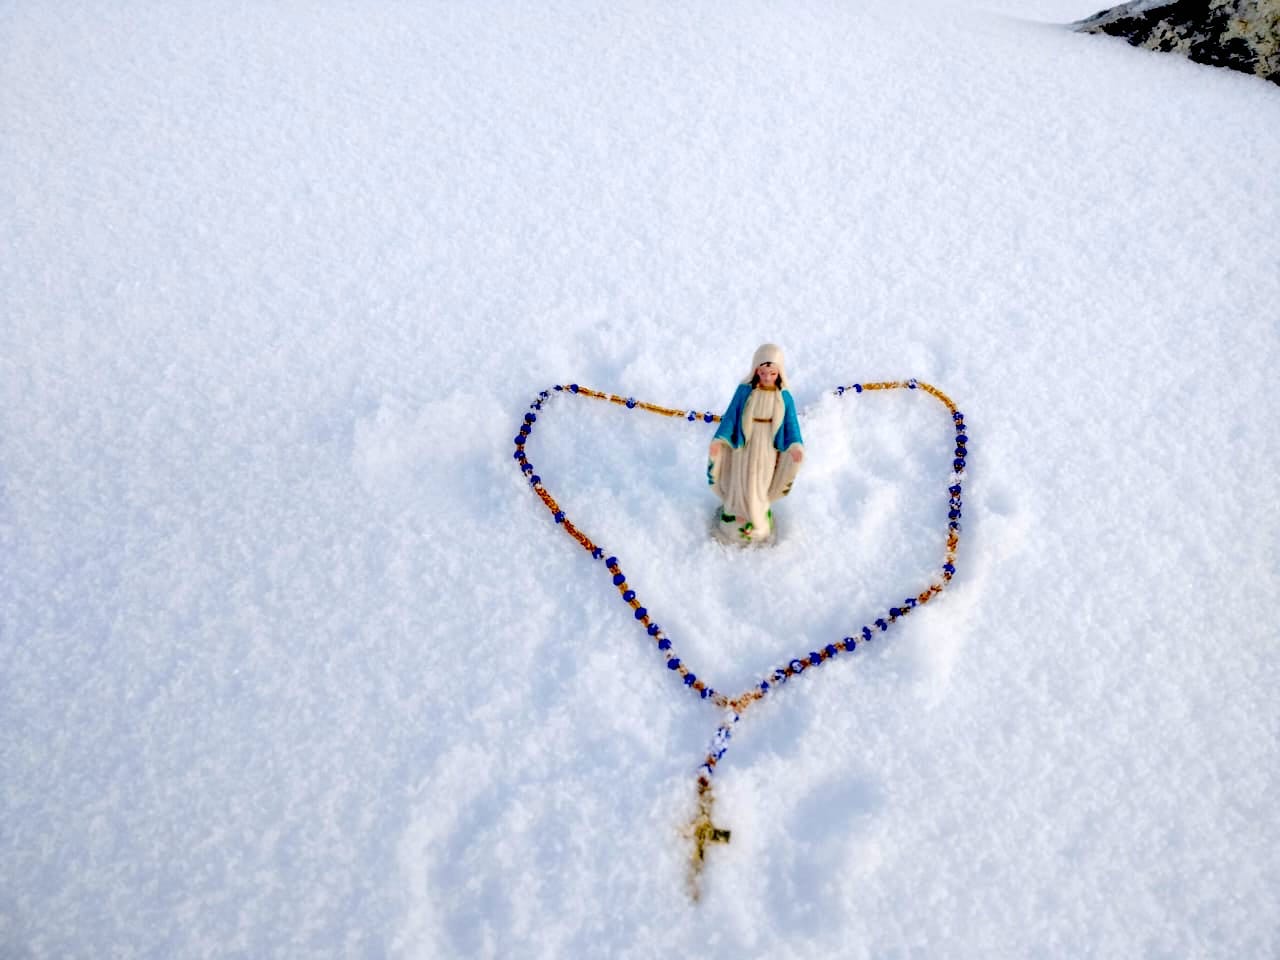 Statue of Virgin Mary and Rosary with snow in the background at the top of Mount Everest